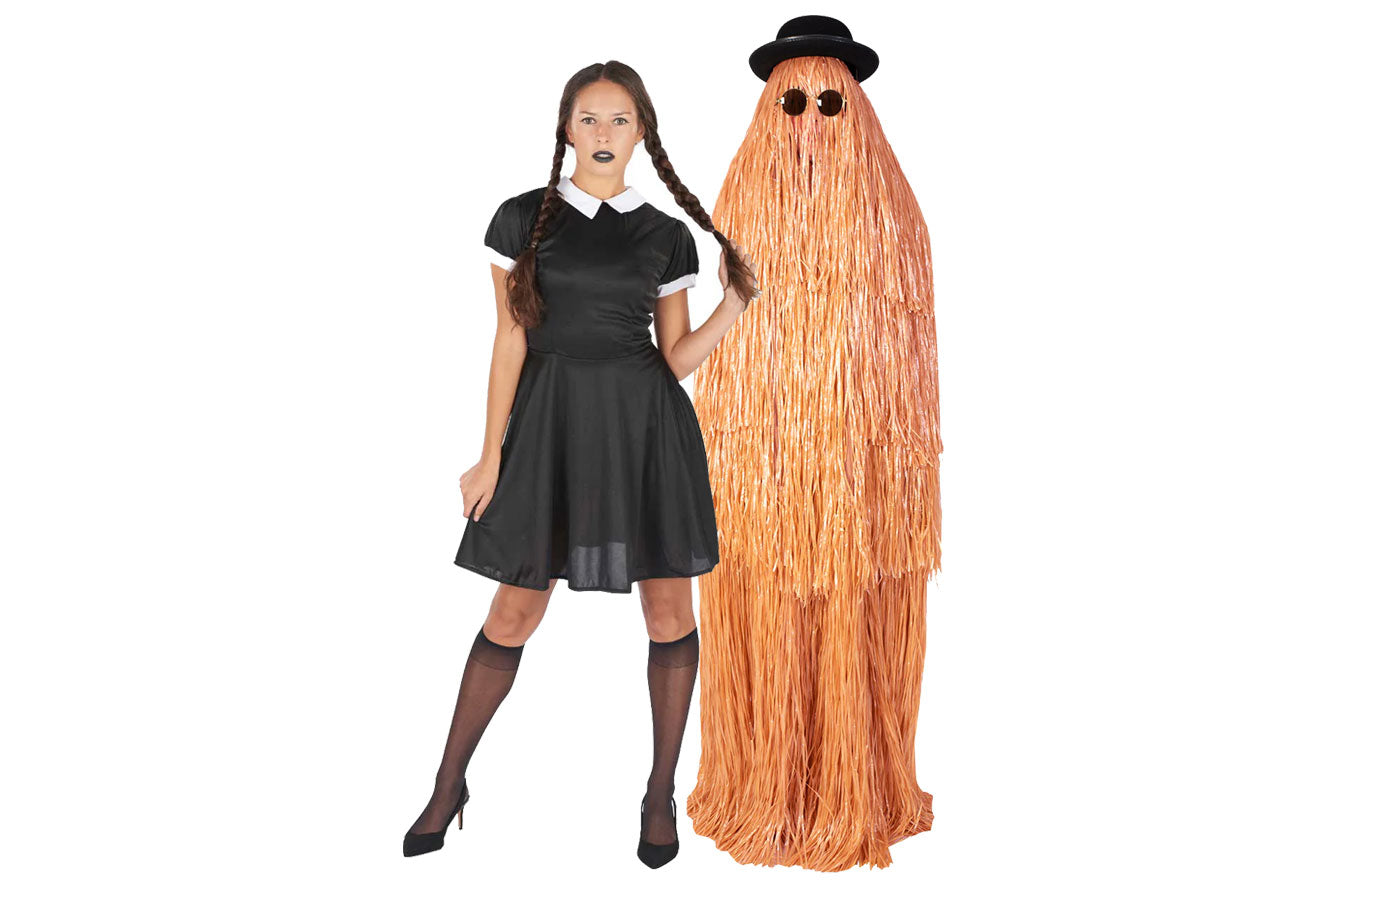 30 Creative Couples Halloween Costume Ideas pic picture